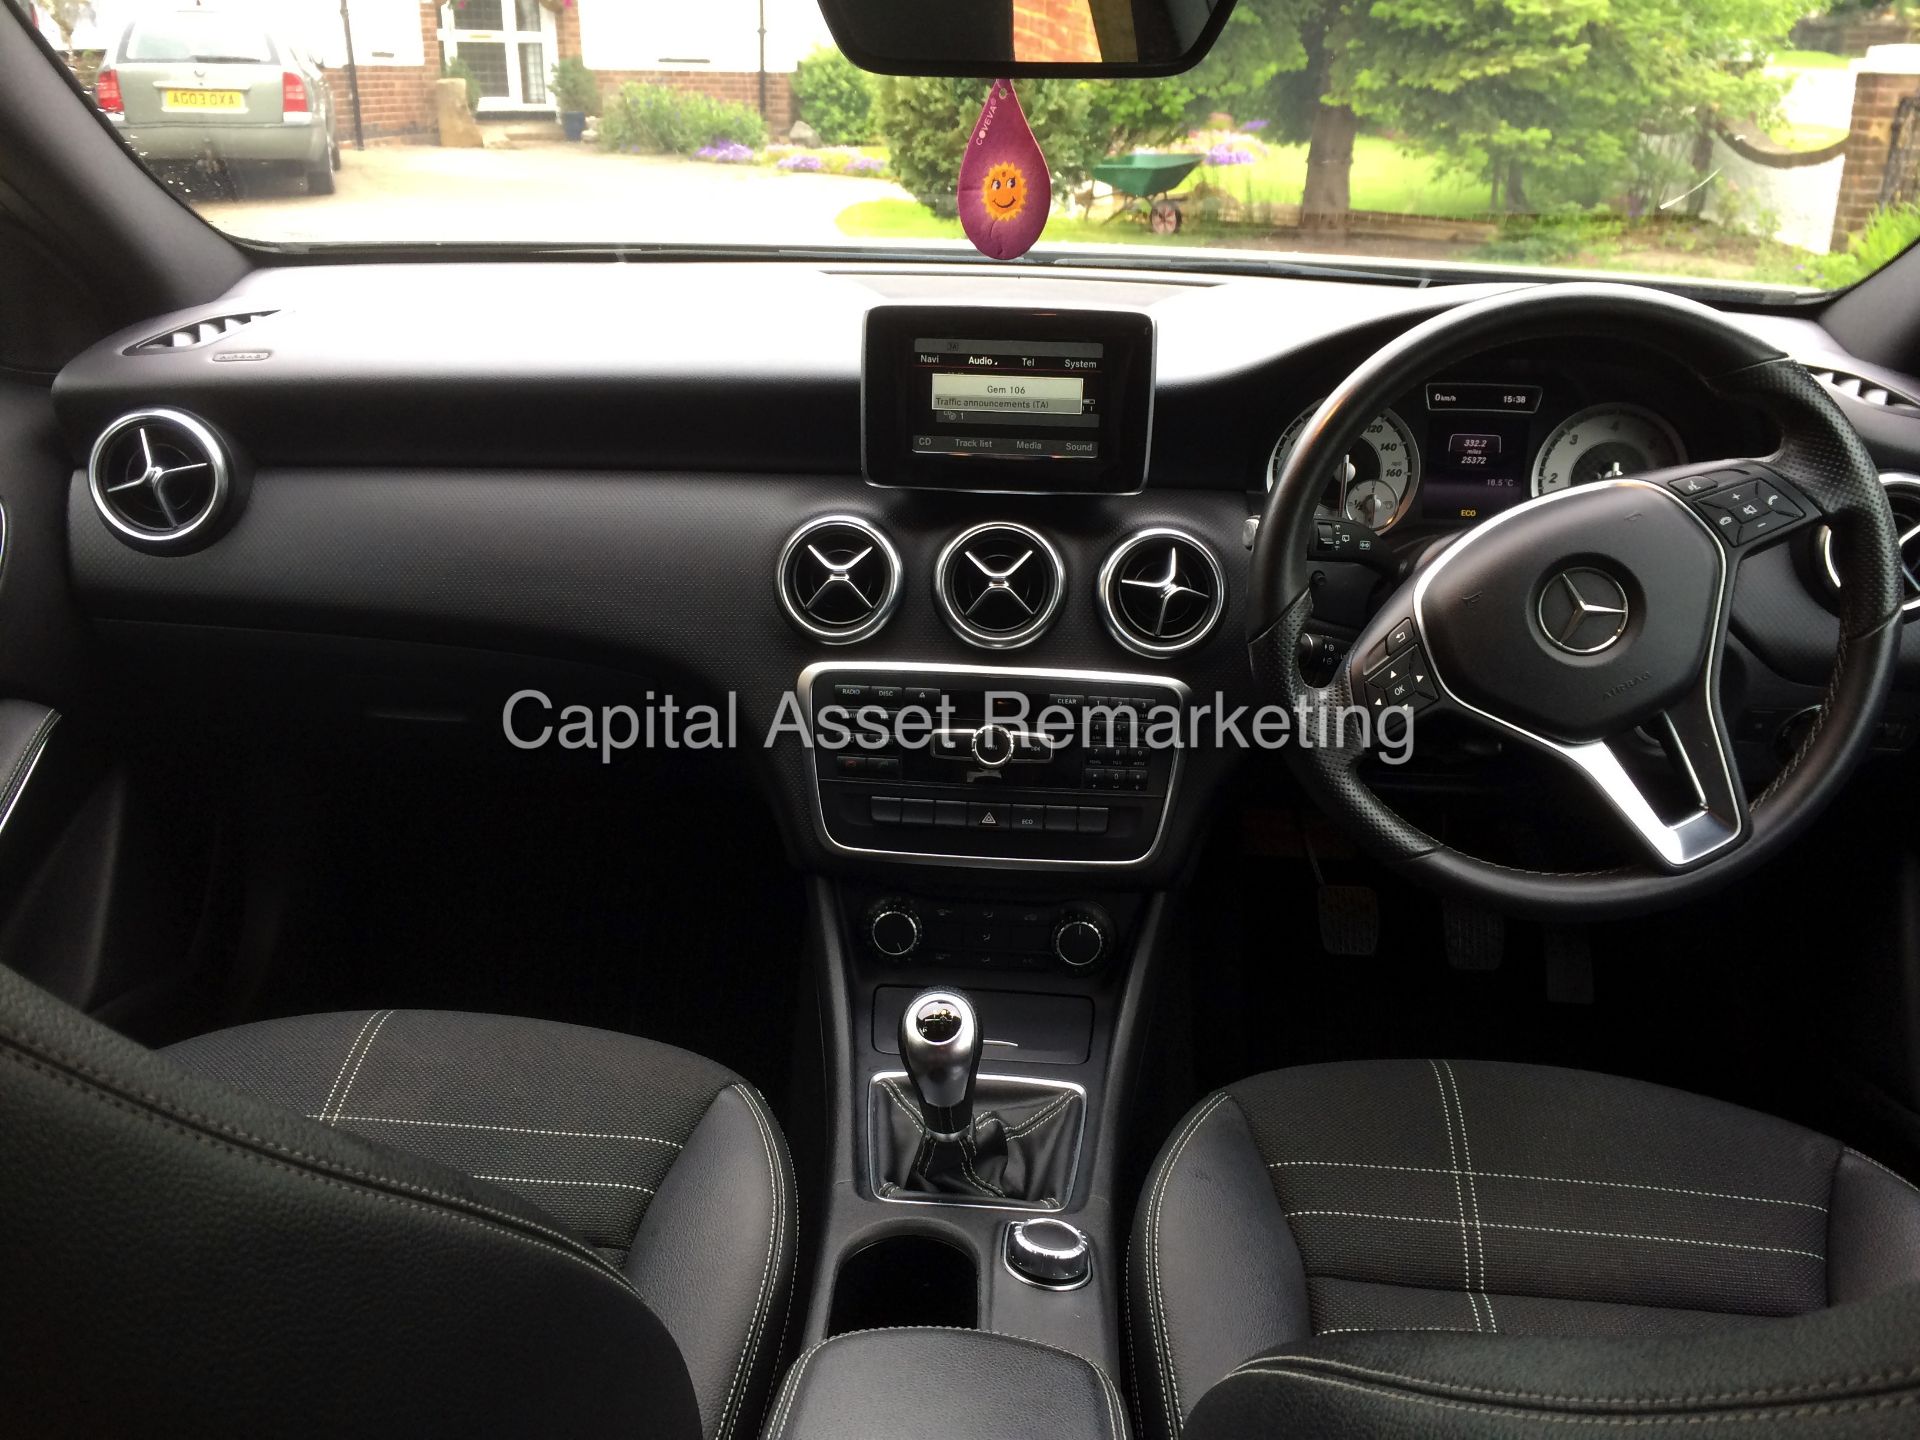 (On Sale) MERCEDES A180cdi "SPORT EDITION" (2015 MODEL) ONLY 25,000 MILES - SAT NAV -PARTIAL LEATHER - Image 9 of 18